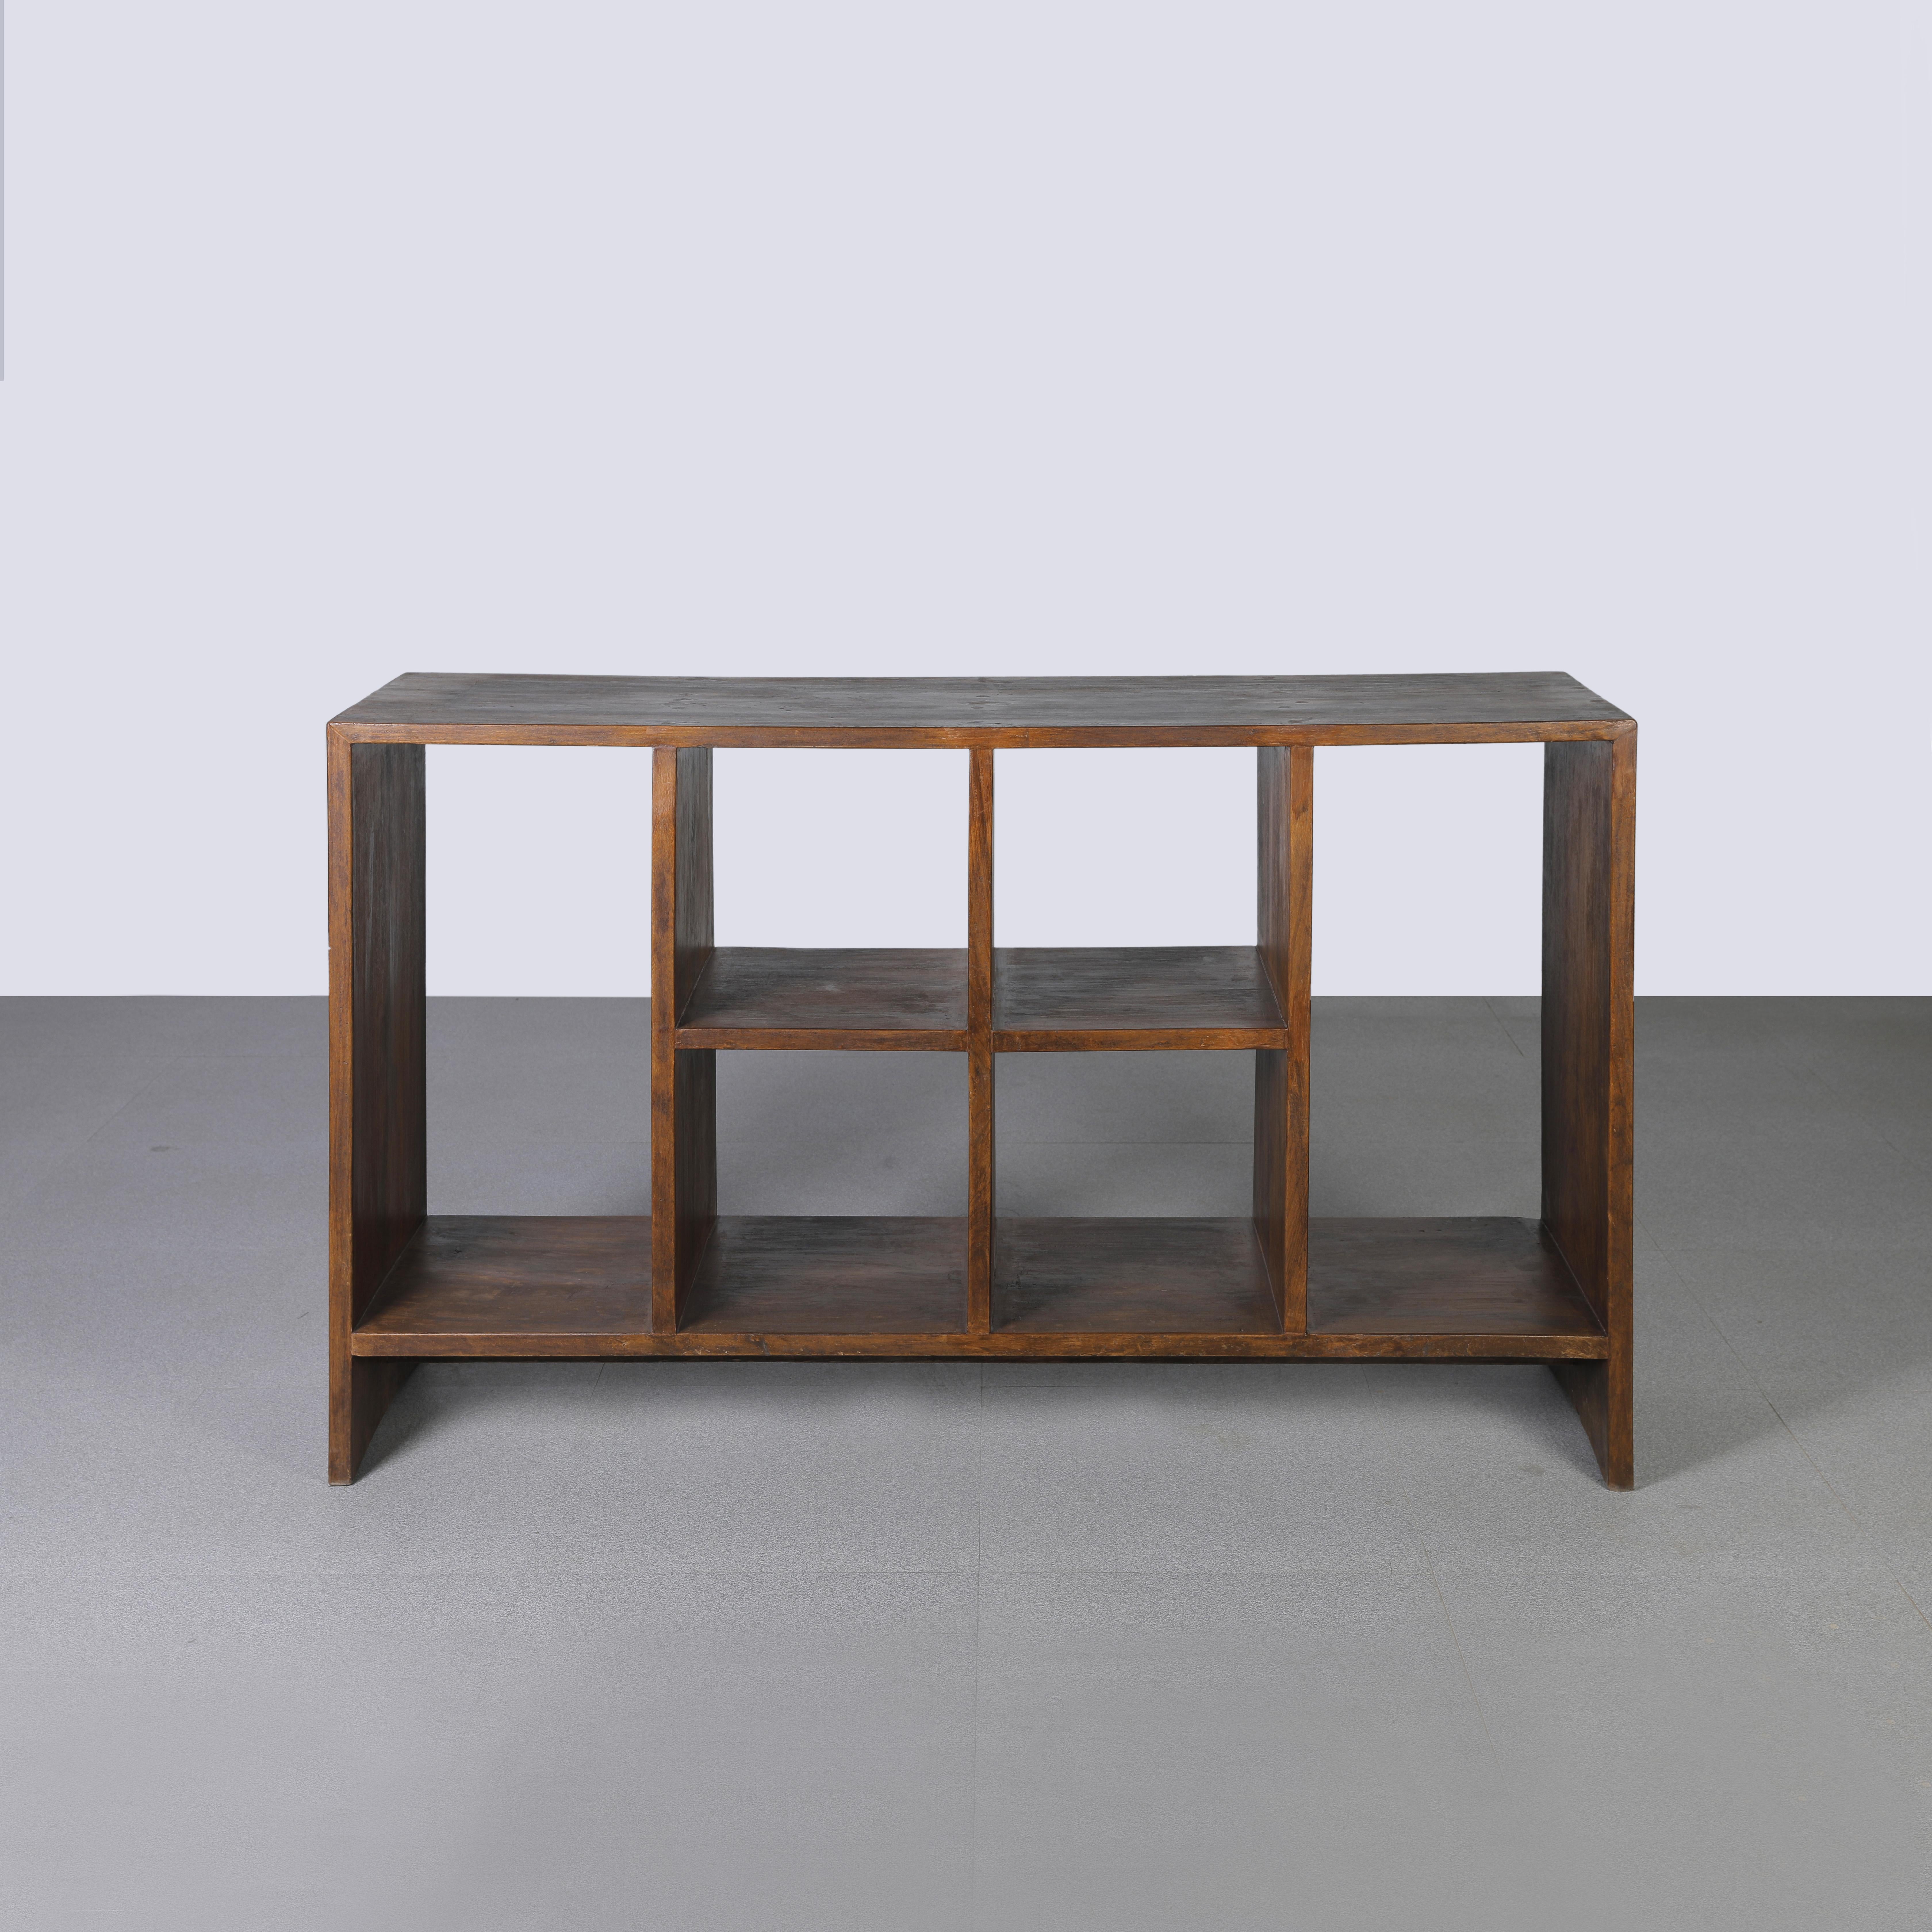 Pierre Jeanneret PJ-R-27-A File Rack / Authentic Mid-Century Modern Chandigarh In Good Condition For Sale In Zürich, CH